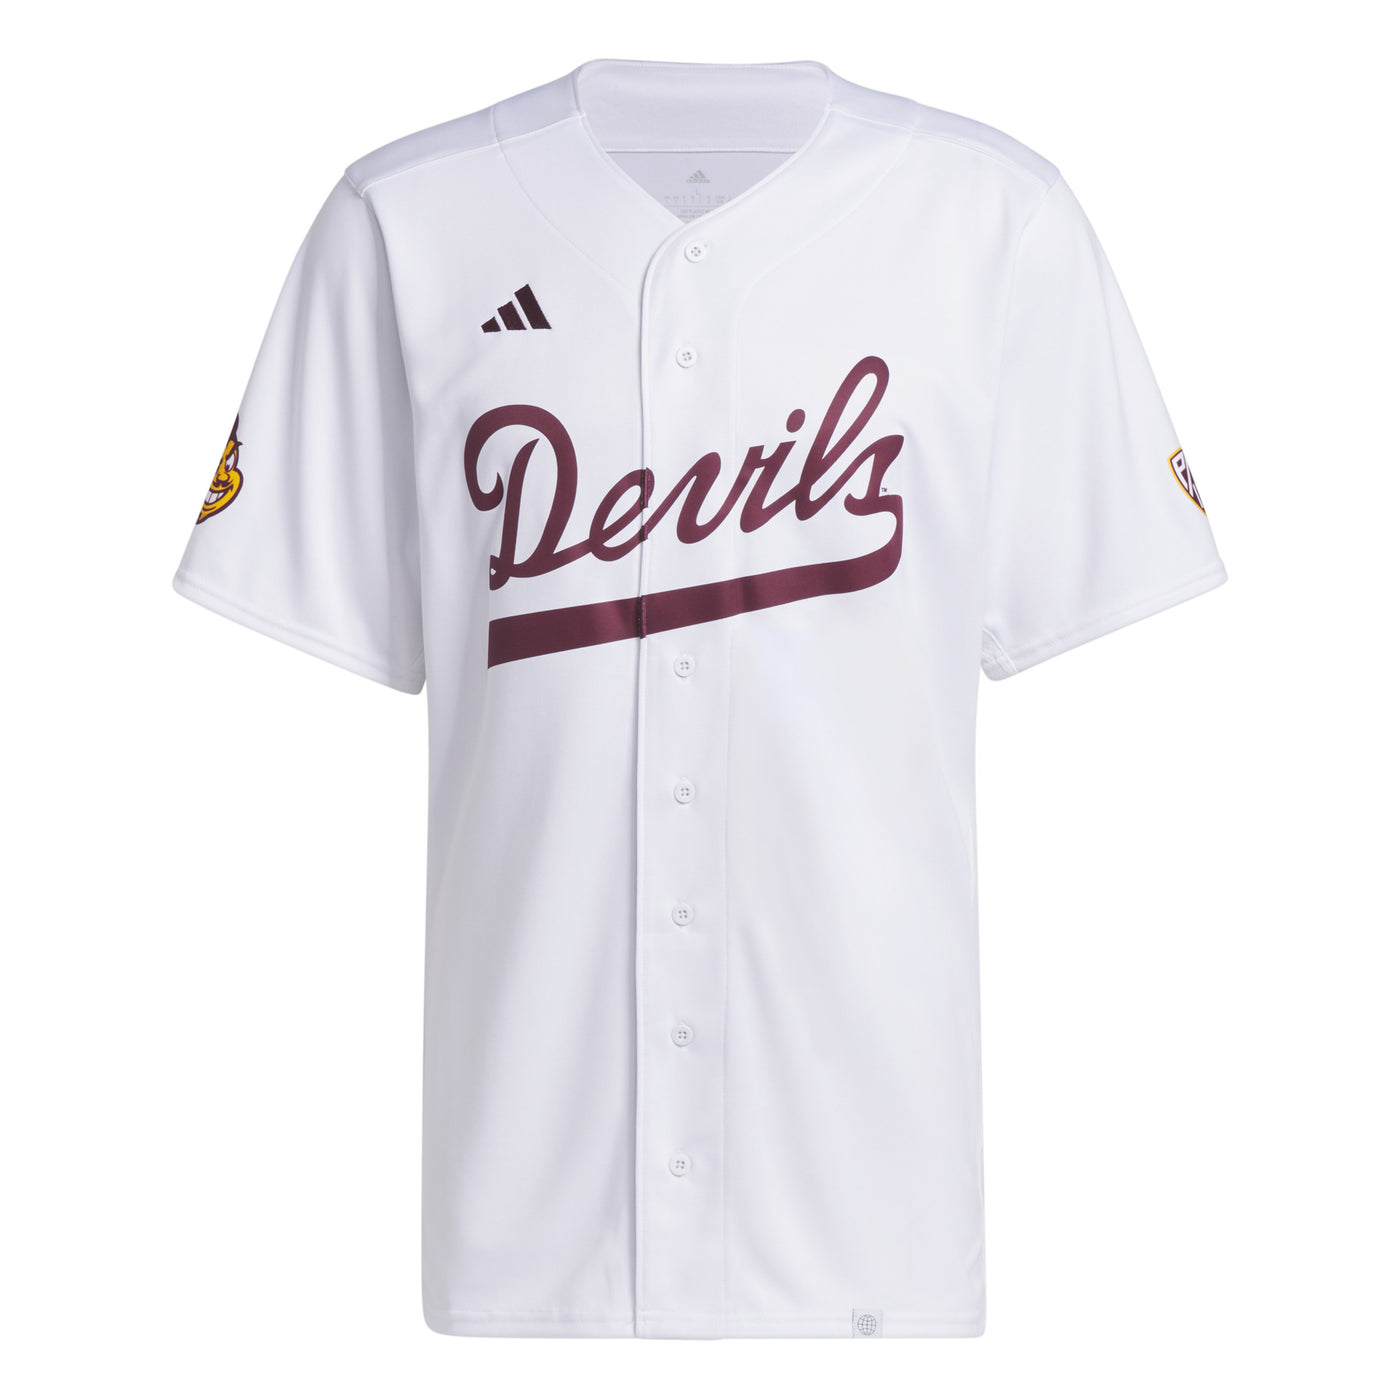 ASU white baseball button up jersey with 'Devils' lettering across the chest